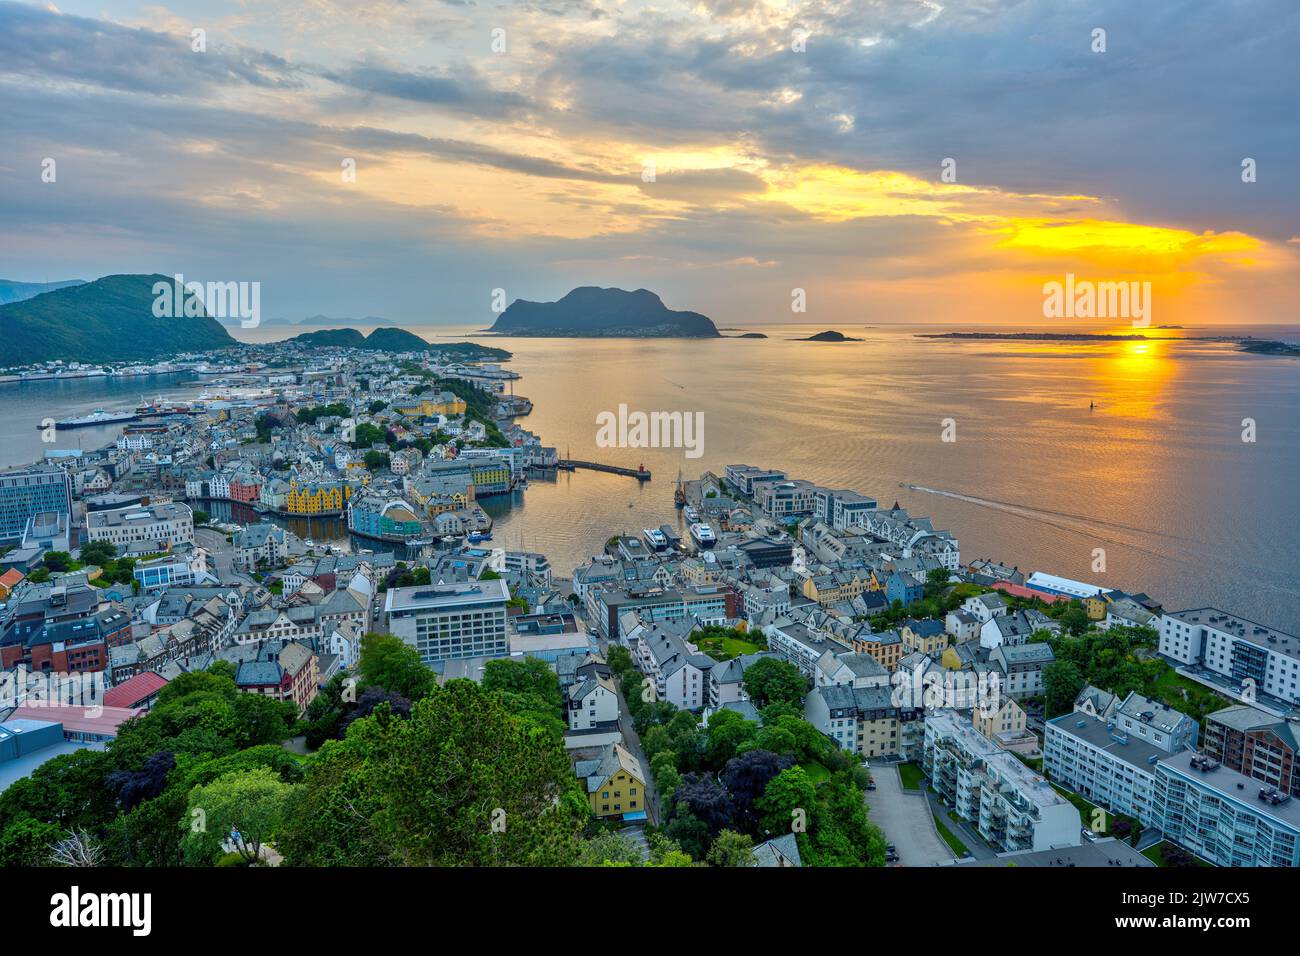 The city of Alesund in Norway during a beautiful sunset Stock Photo